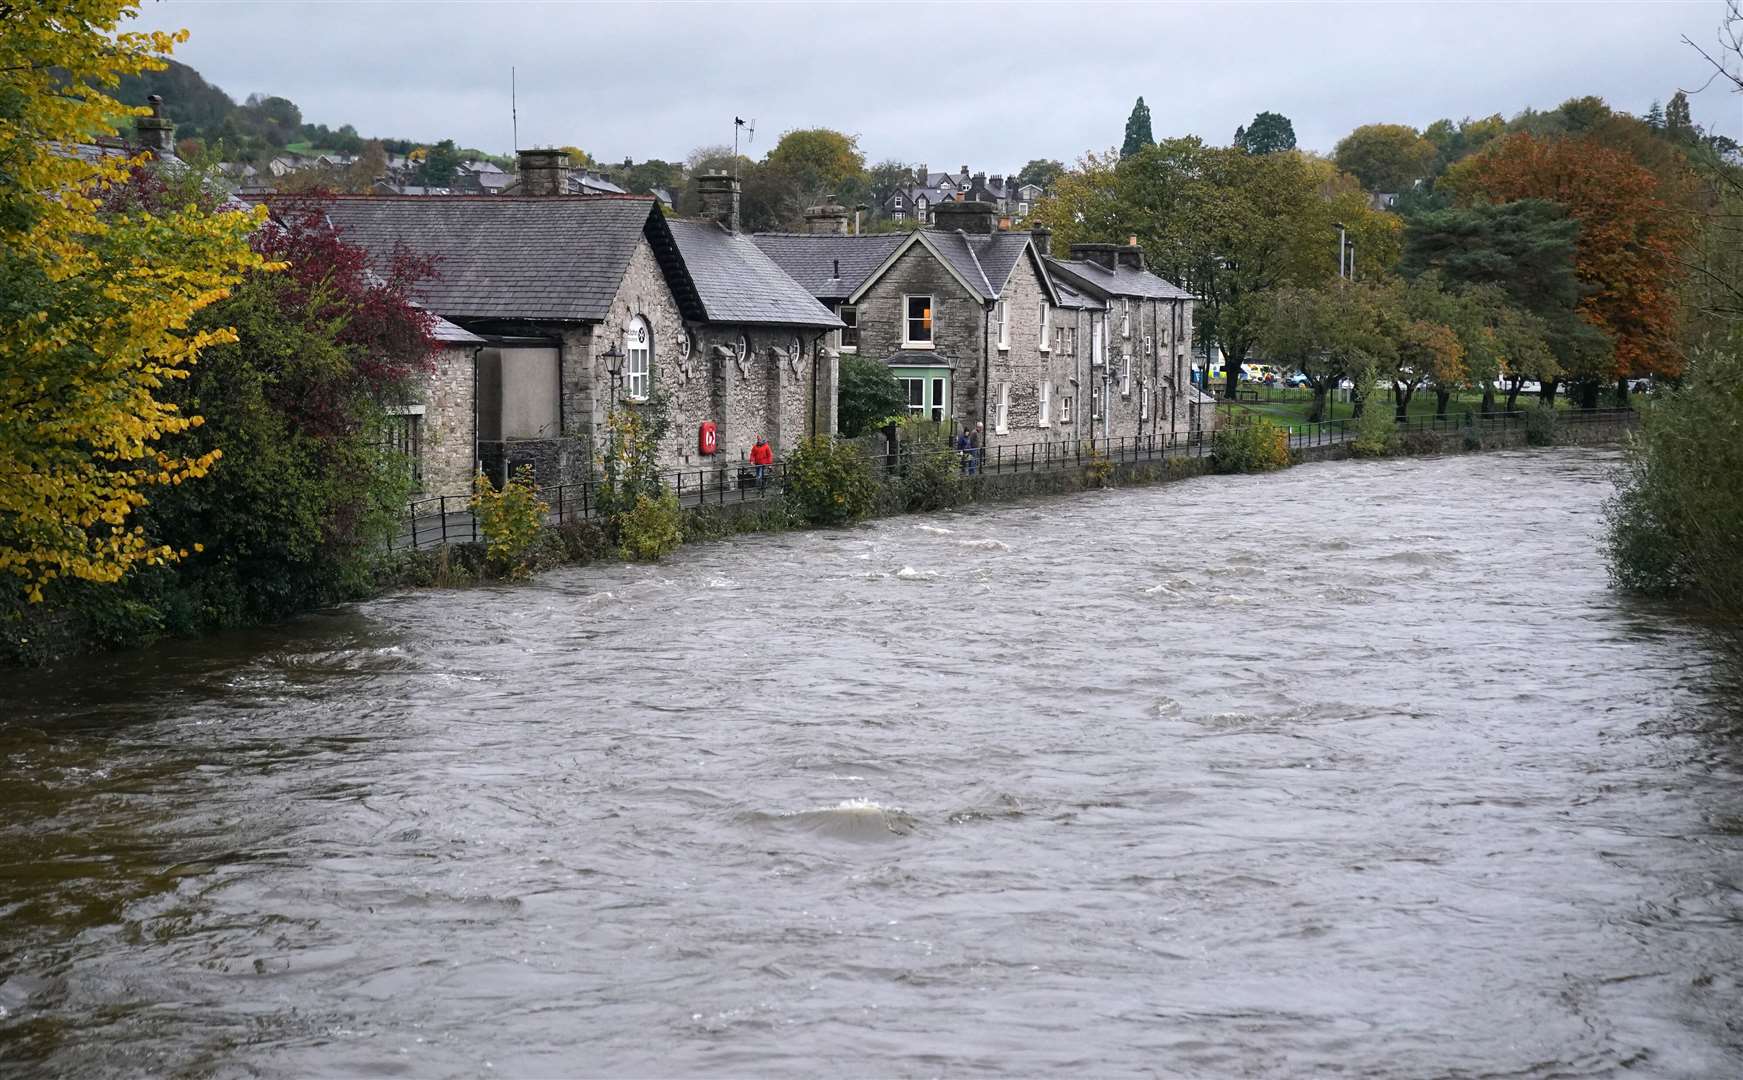 High water levels on the River Kent in Kendal, Cumbria (Owen Humphreys/PA)